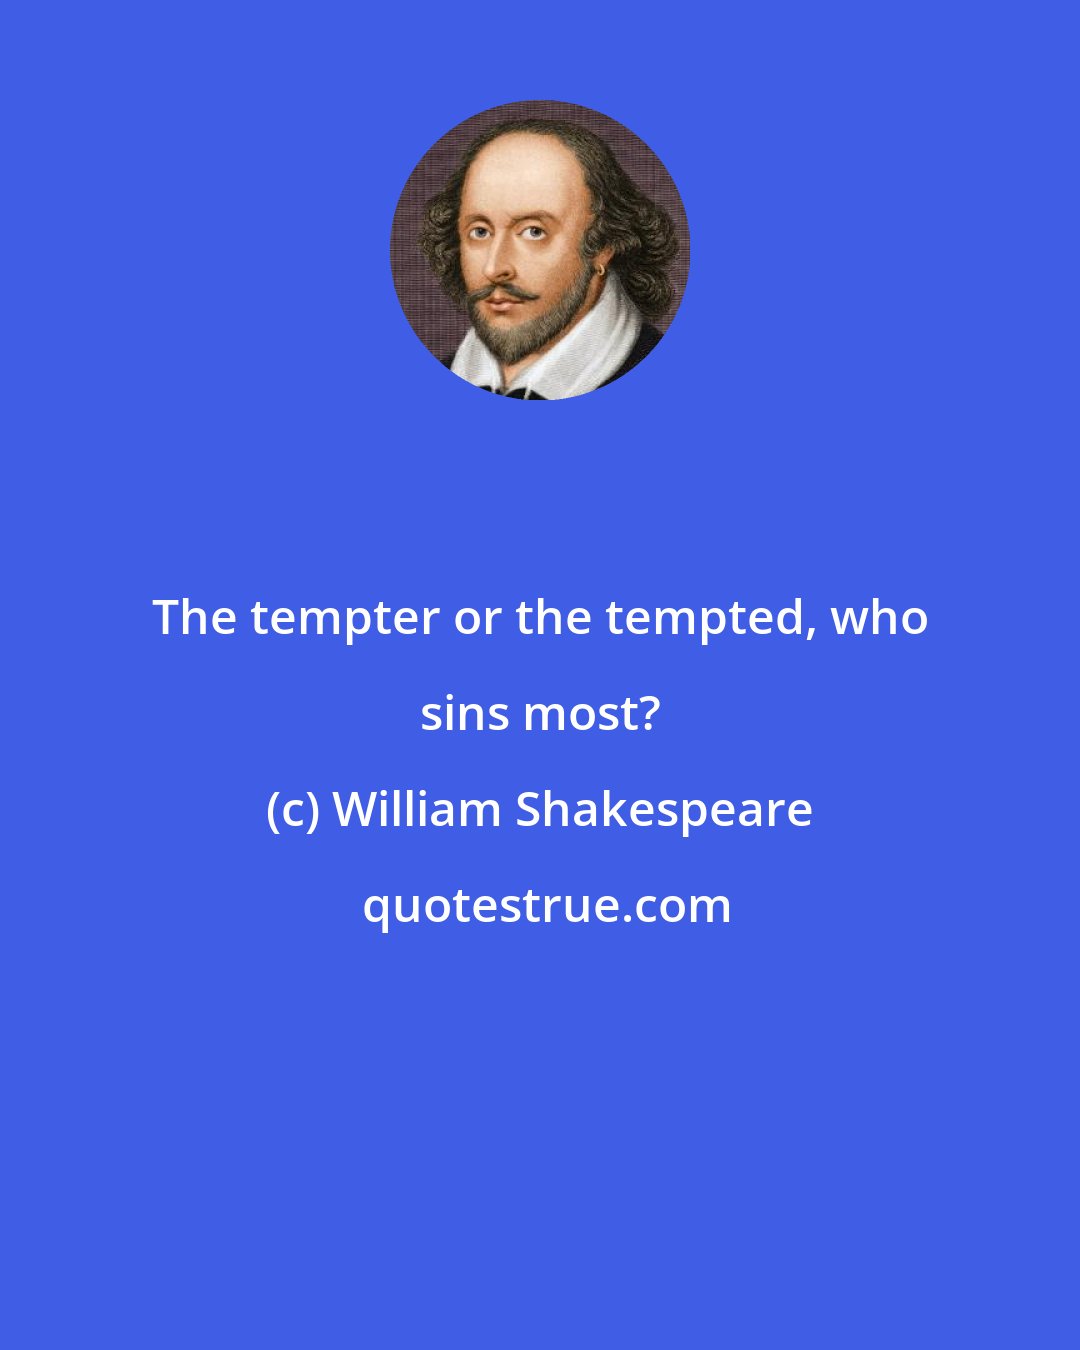 William Shakespeare: The tempter or the tempted, who sins most?